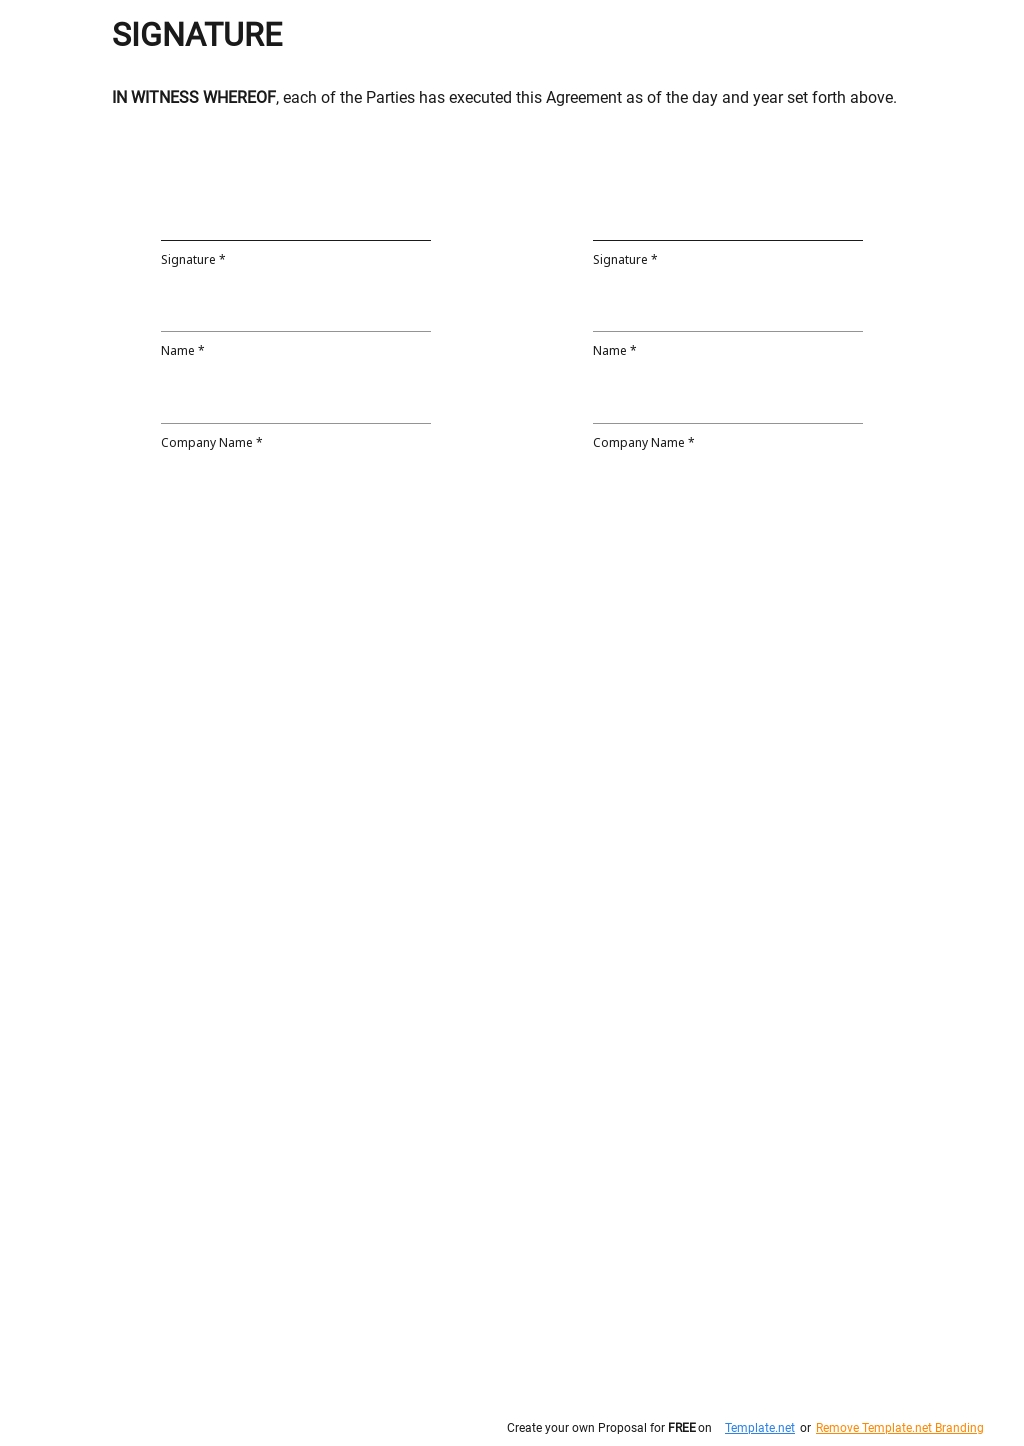 Master Risk Participation Agreement Template